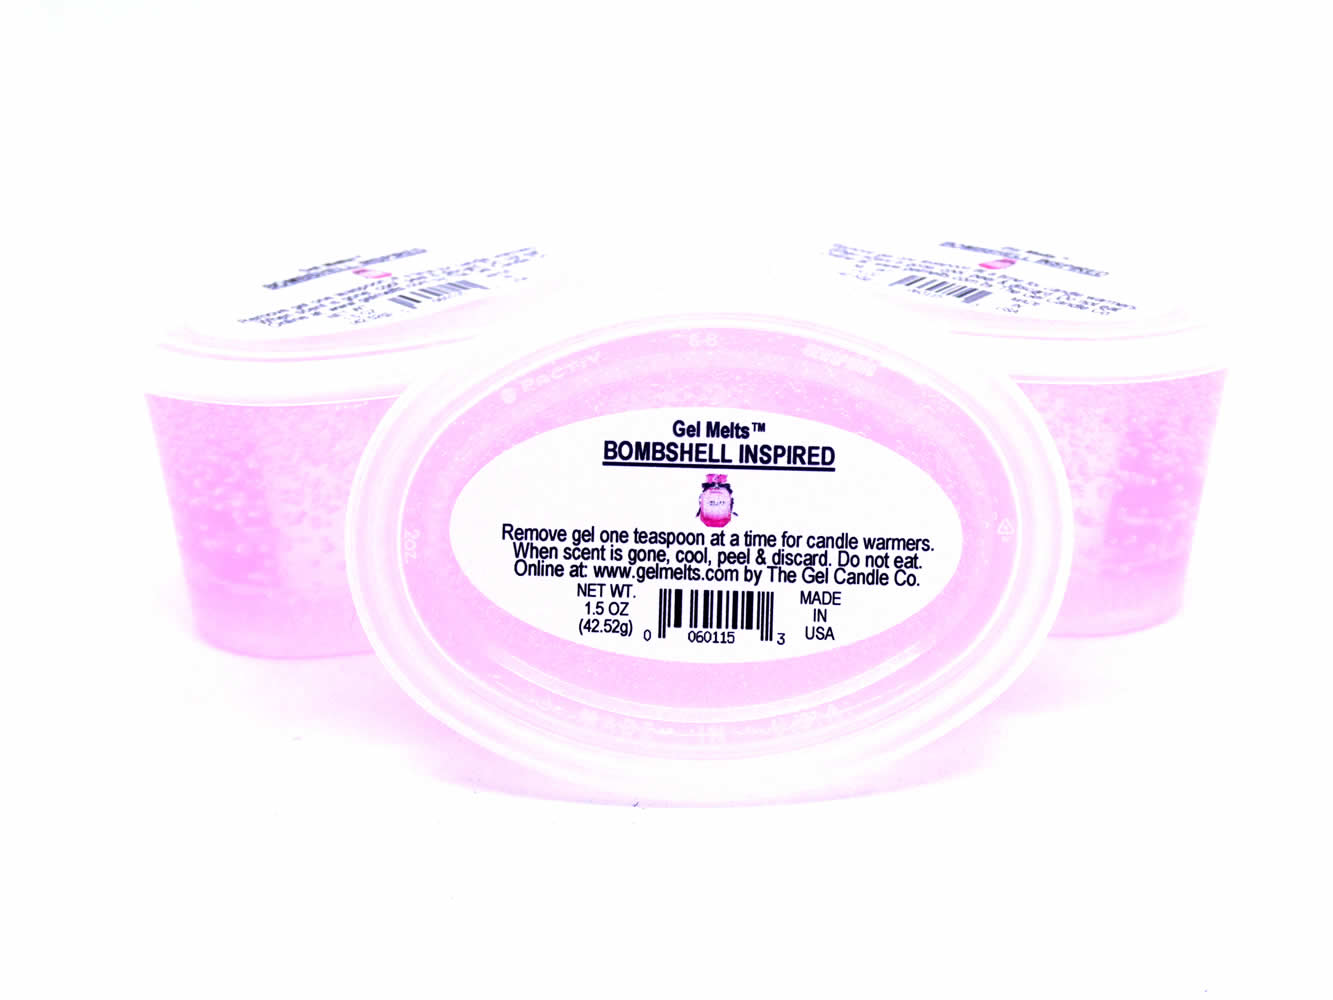 Bombshell Inspired Scented Gel Melts™ for warmers 3 pack